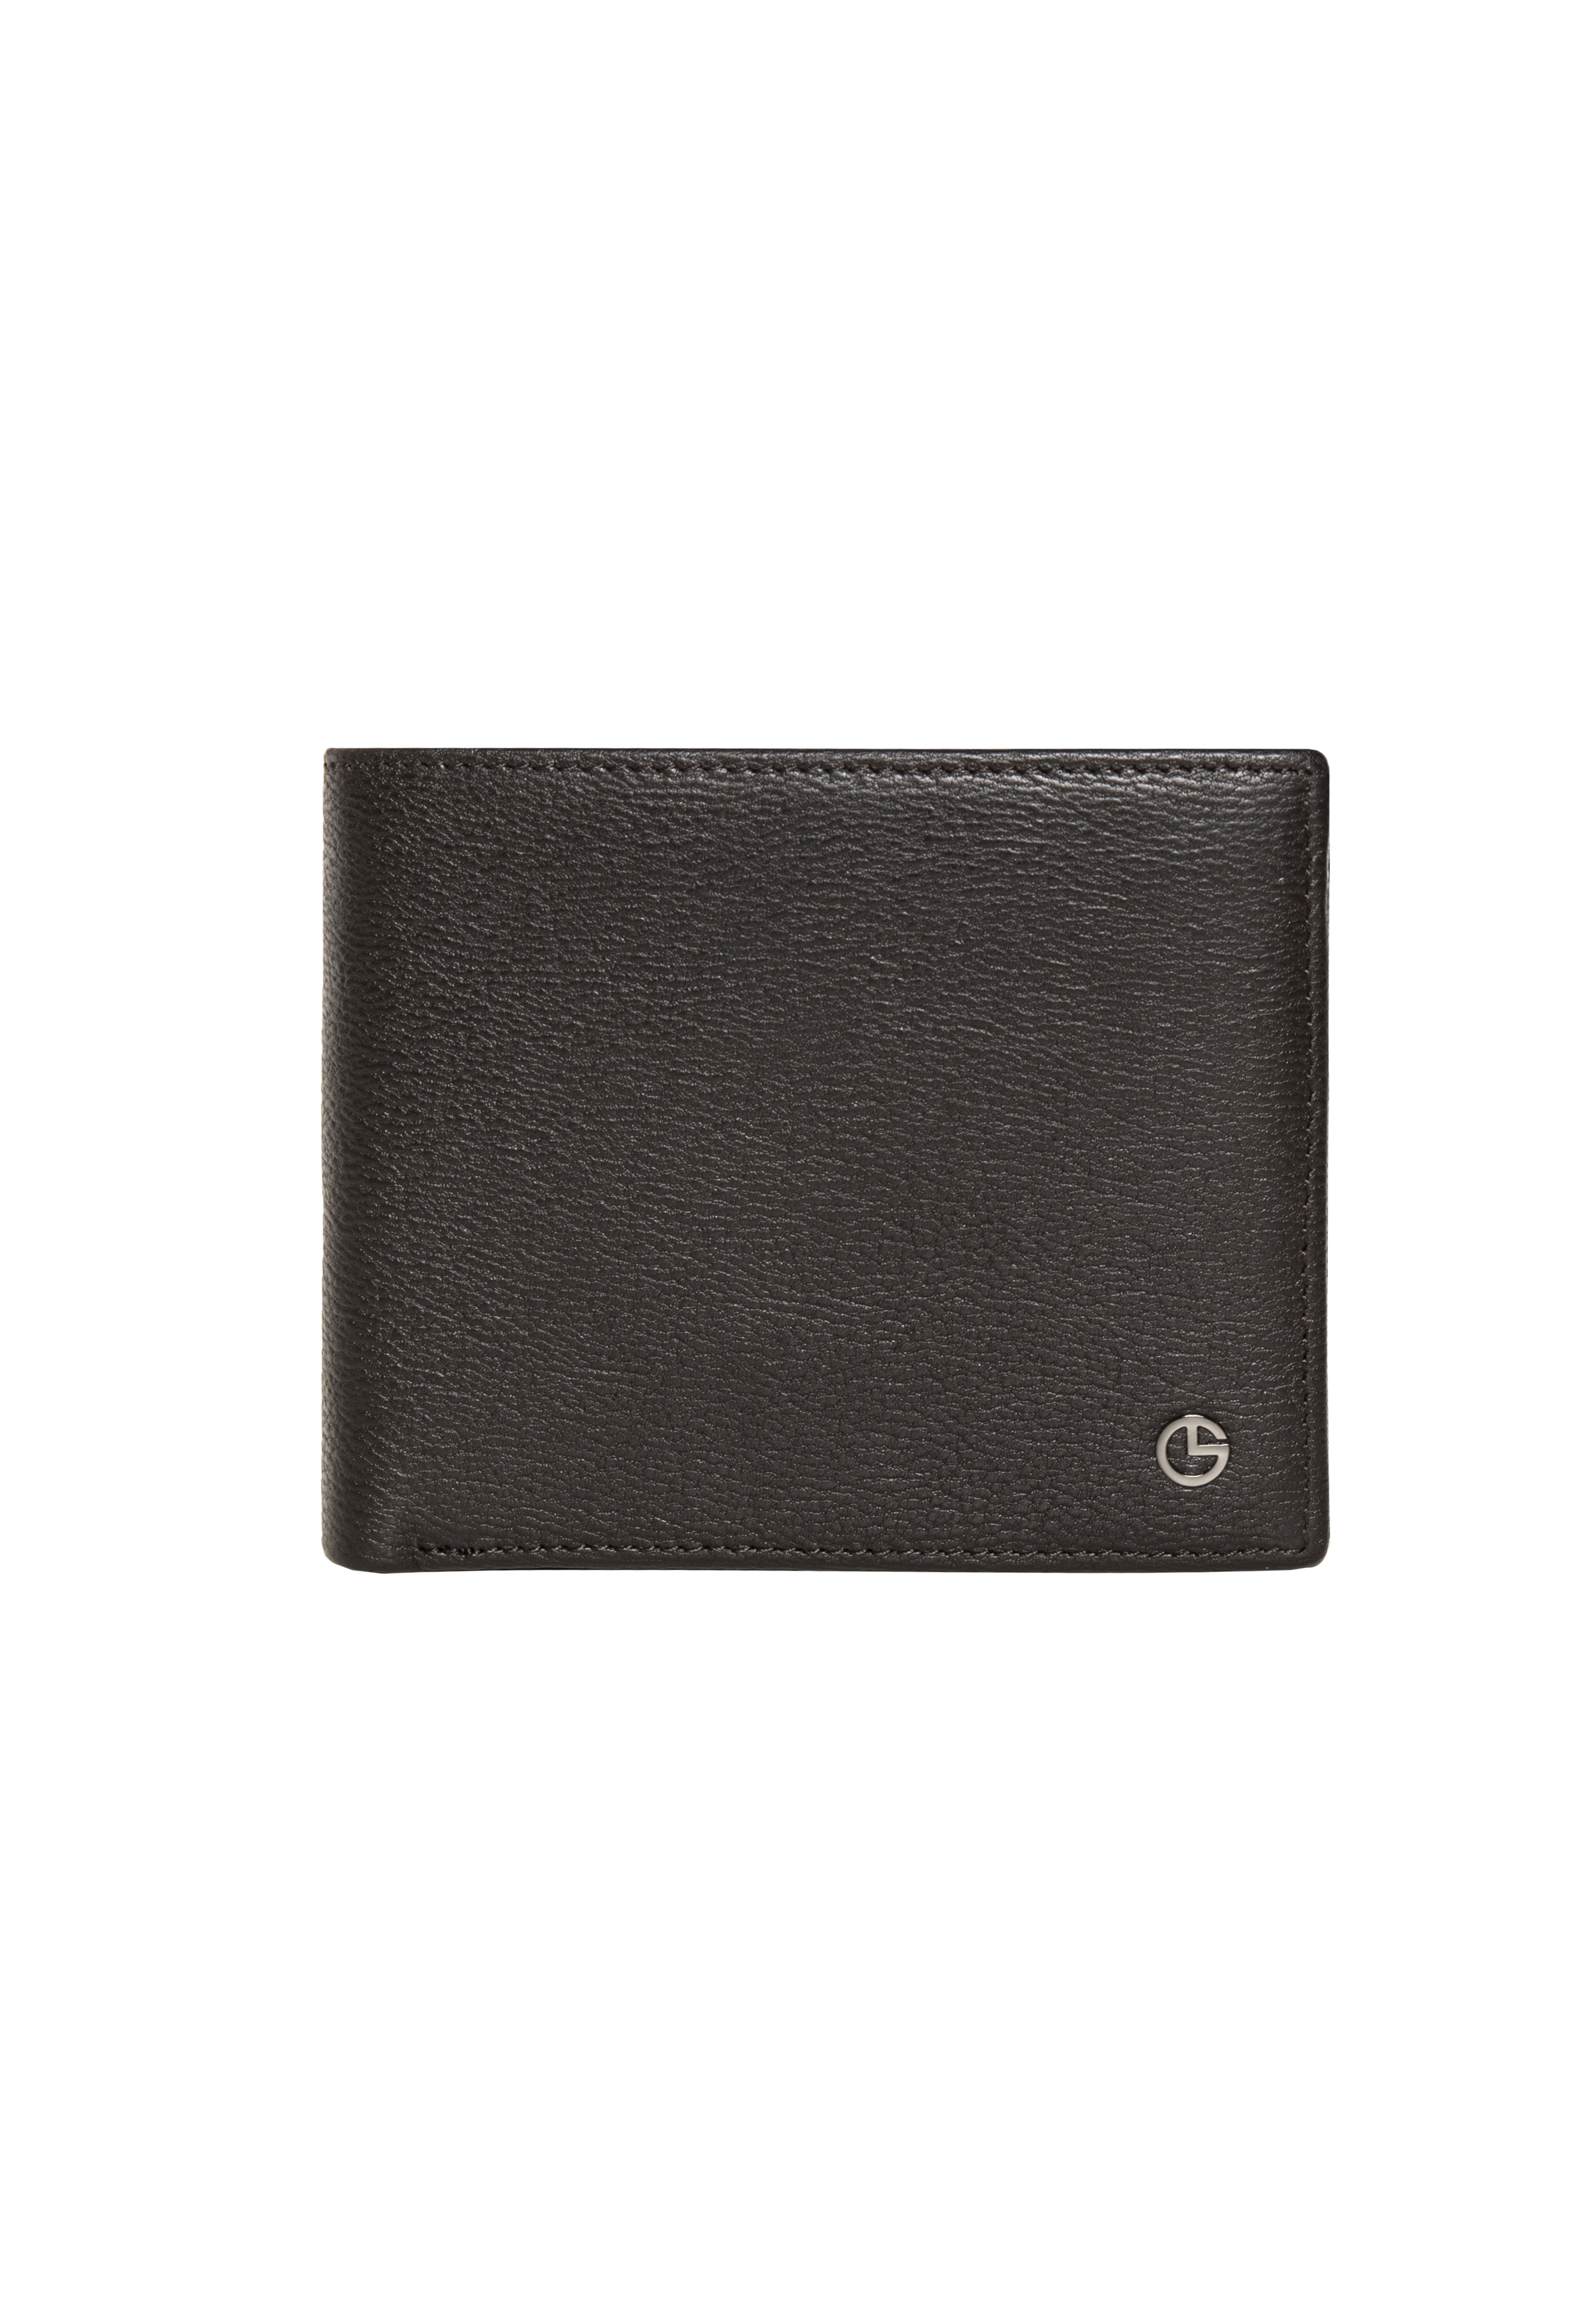 [Online Exclusive] Goldlion Genuine Leather Wallet (3 Cards Slot, Window Compartment, Coin Pouch)